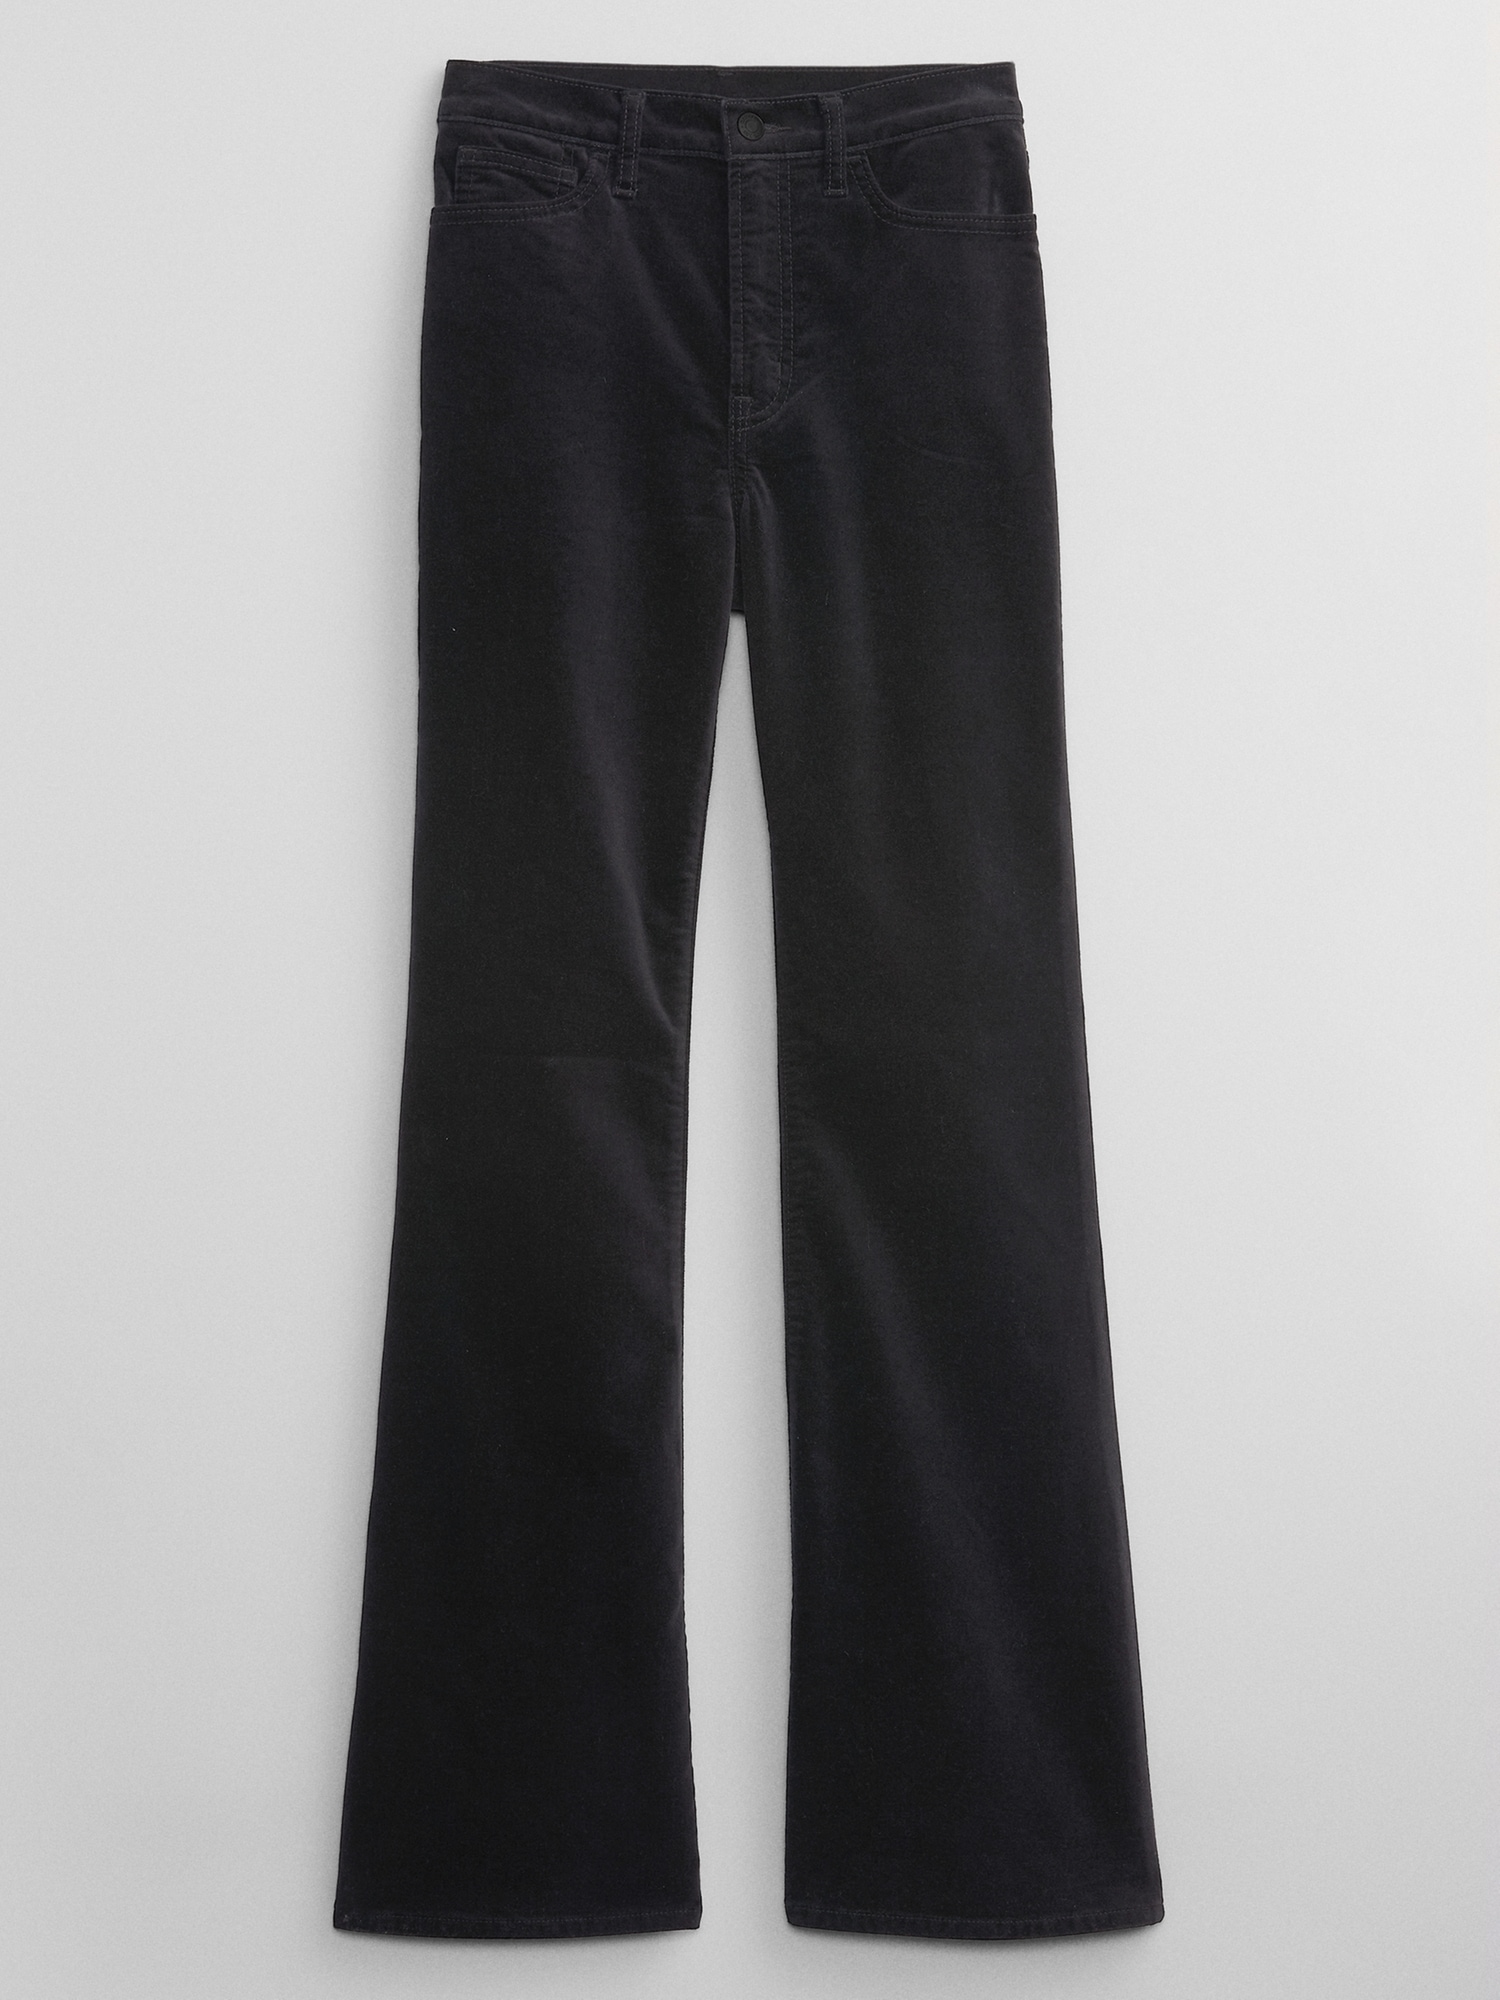 High Rise '70s Flare Velvet Pants with Washwell | Gap Factory